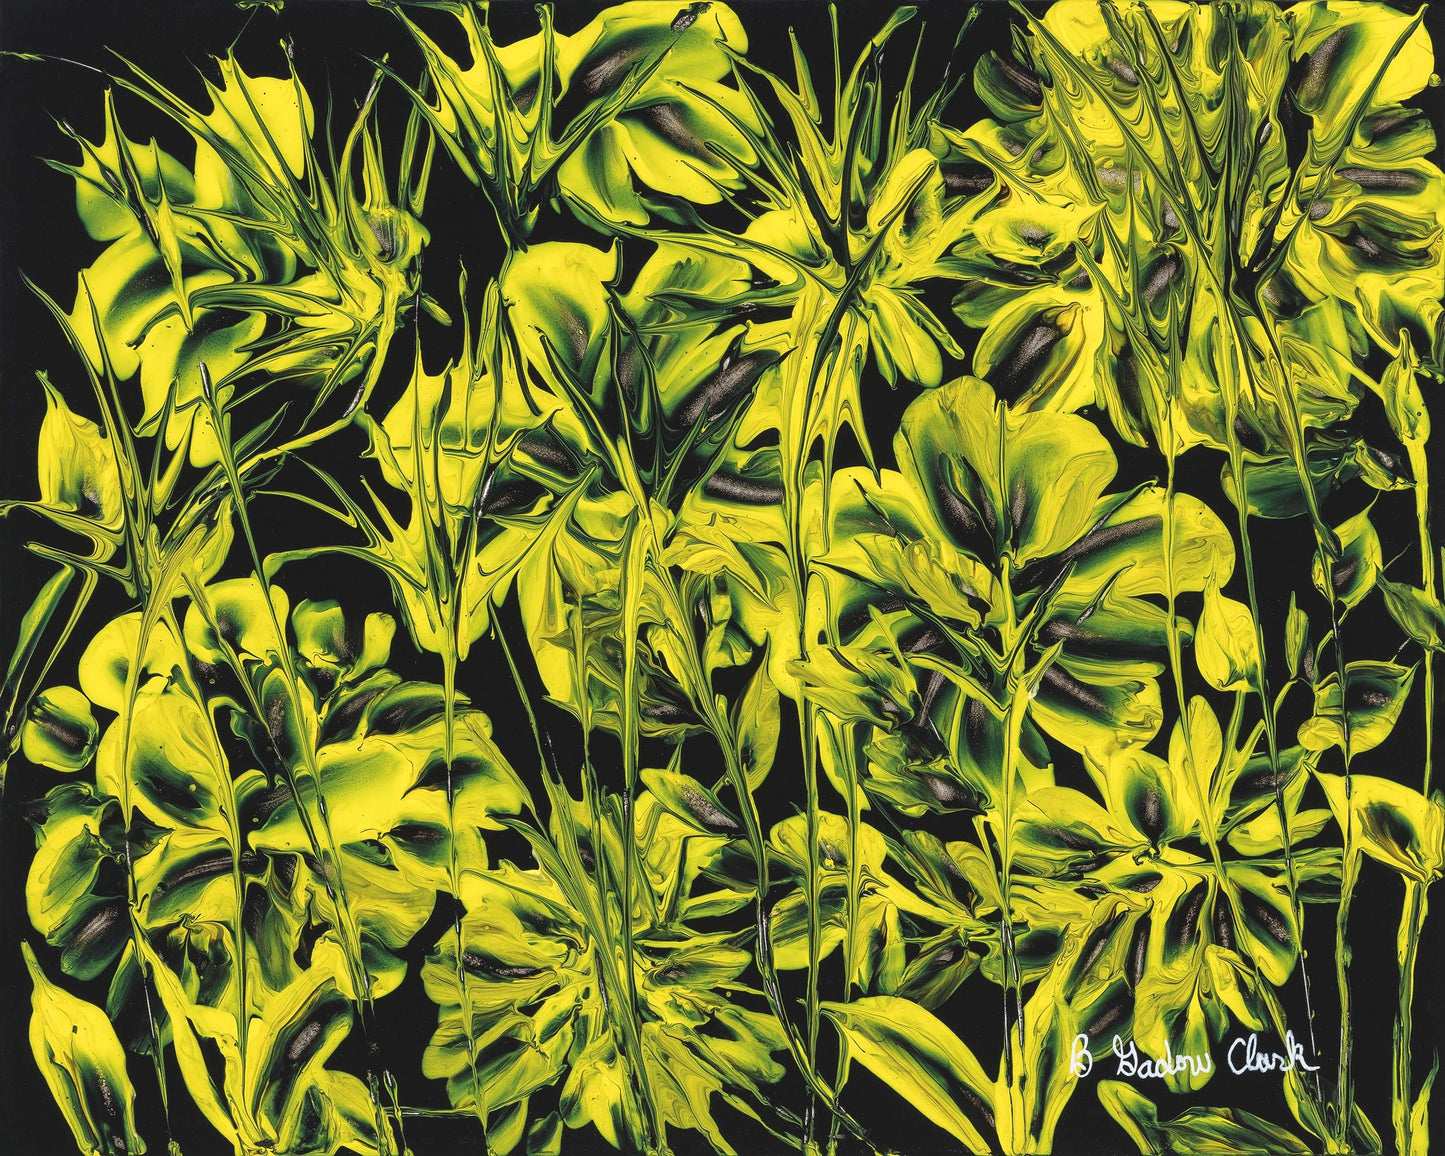 Abstract Yellow Flowers Paper Print Award from Crooked Creek Art League